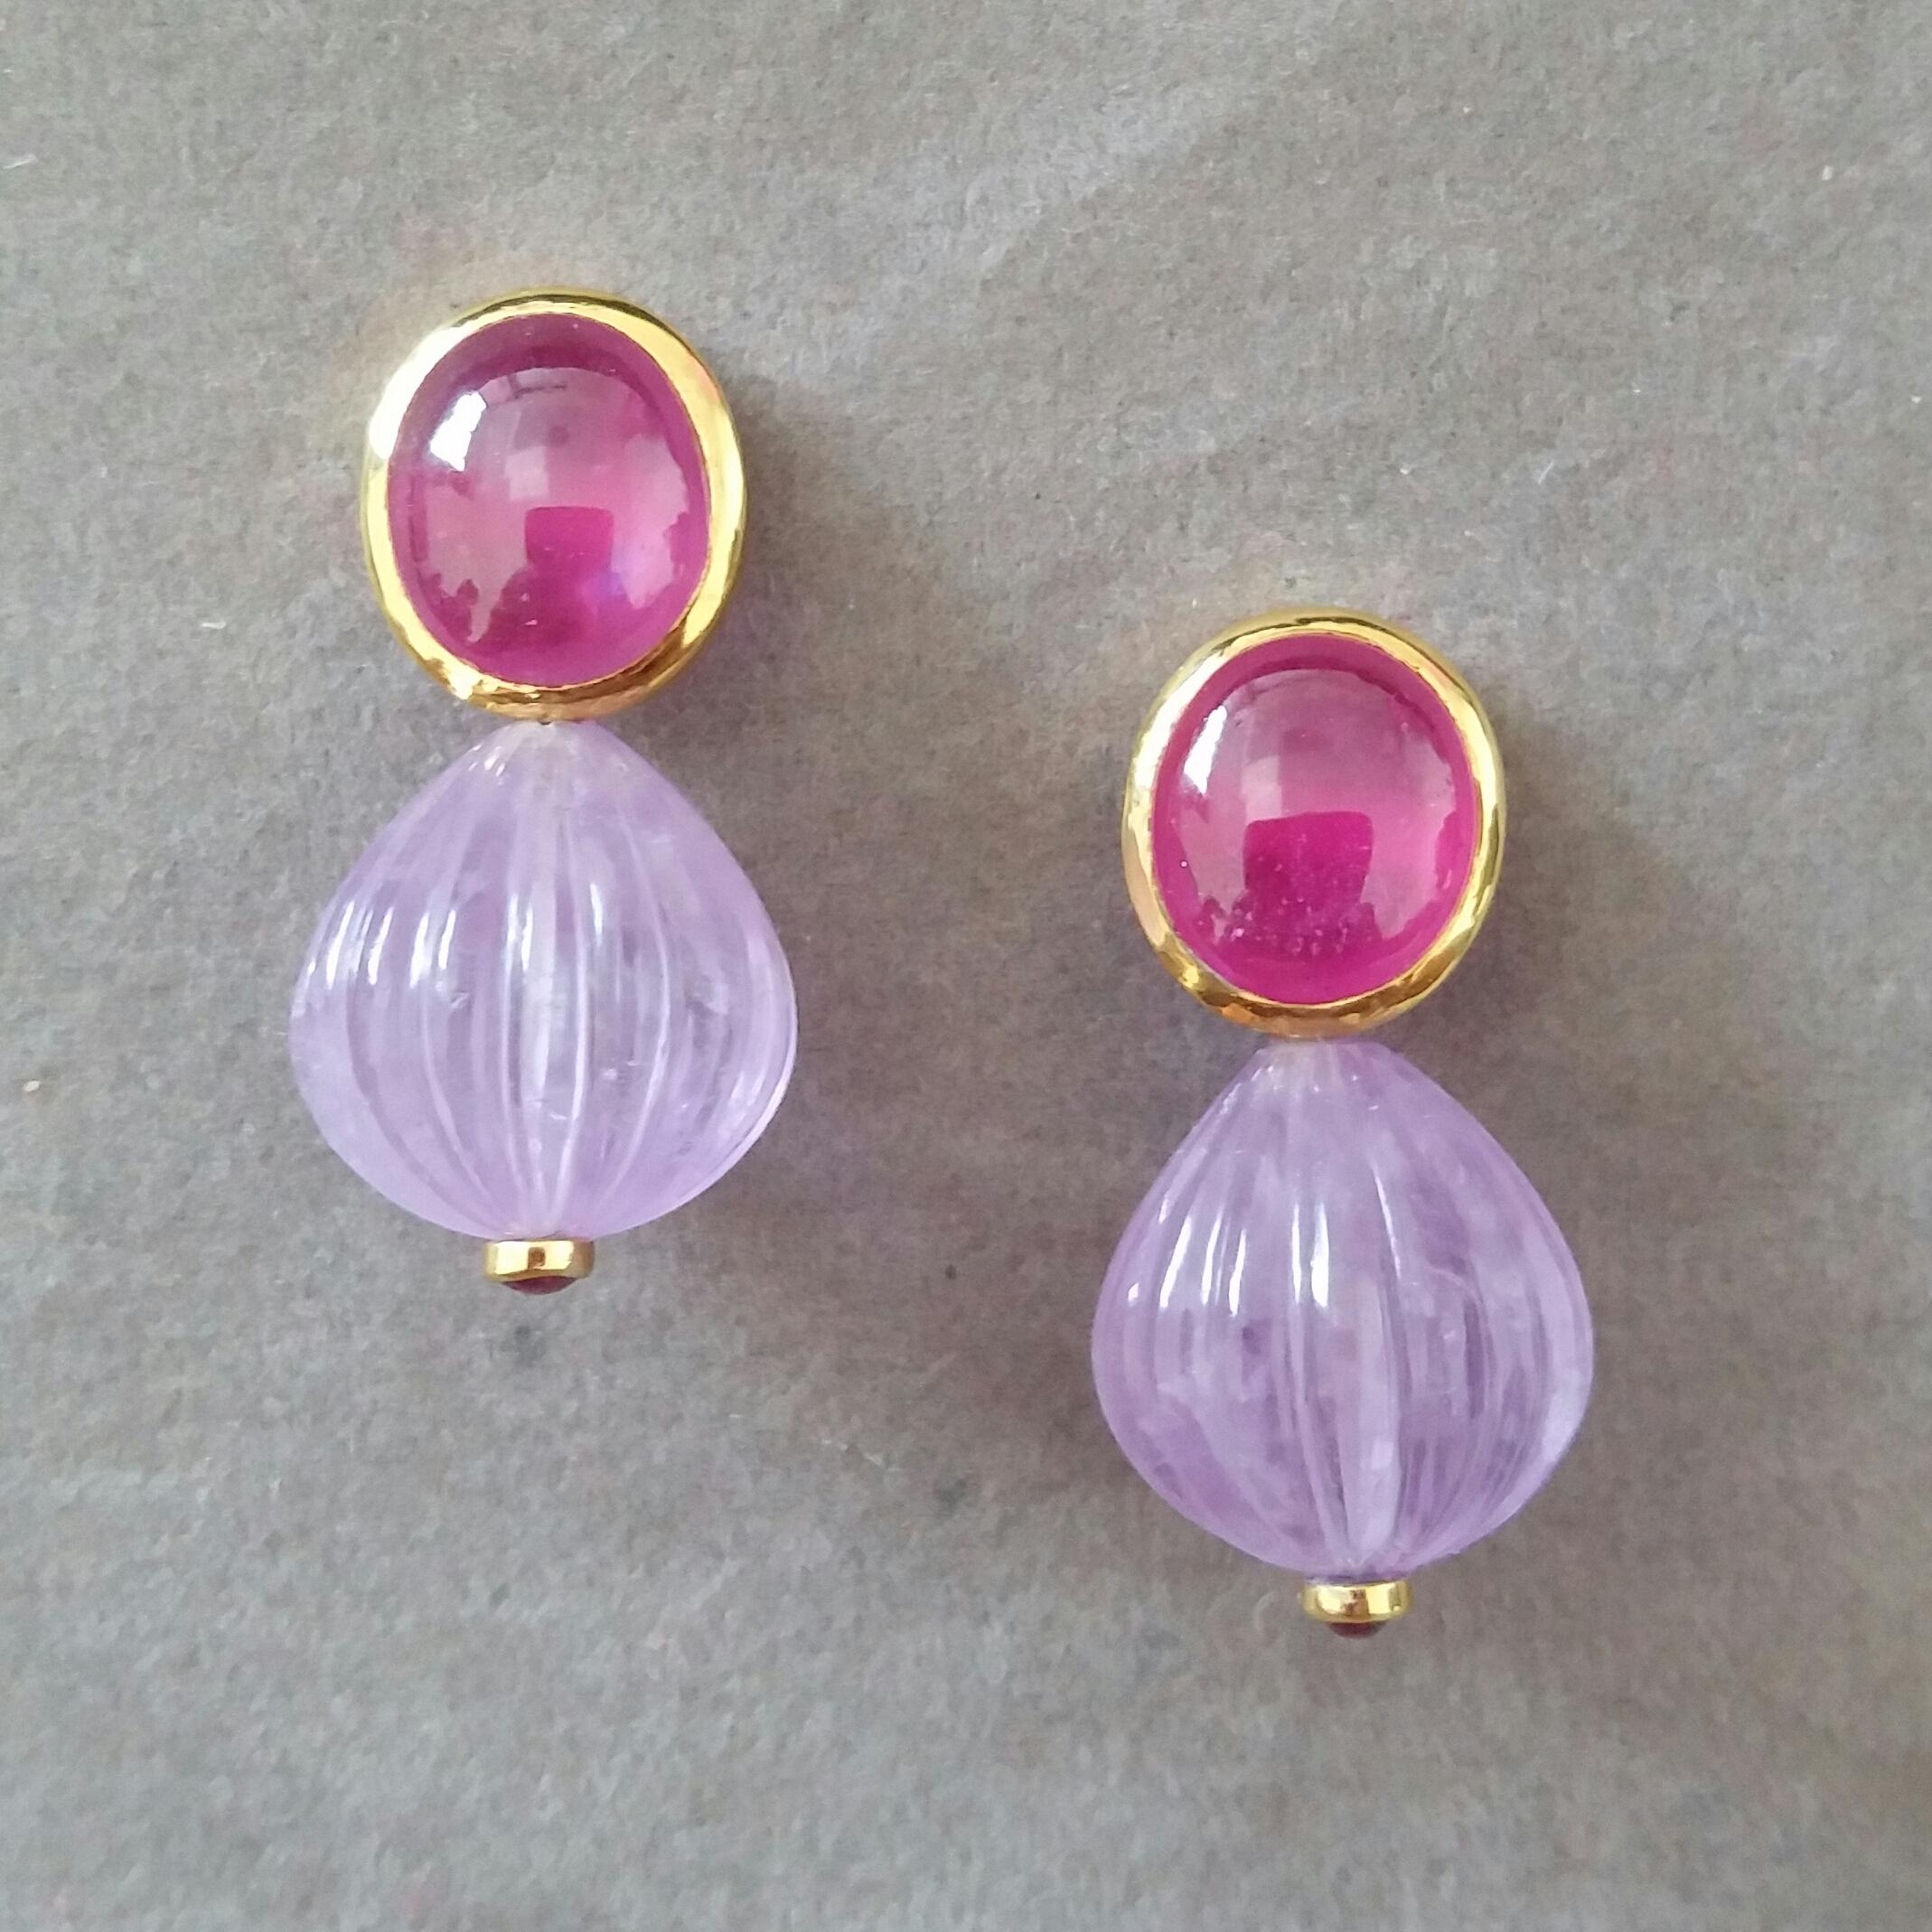 Mixed Cut Oval Ruby Cabochons Yellow Gold Bezel Carved Amethyst Round Drops Stud Earrings